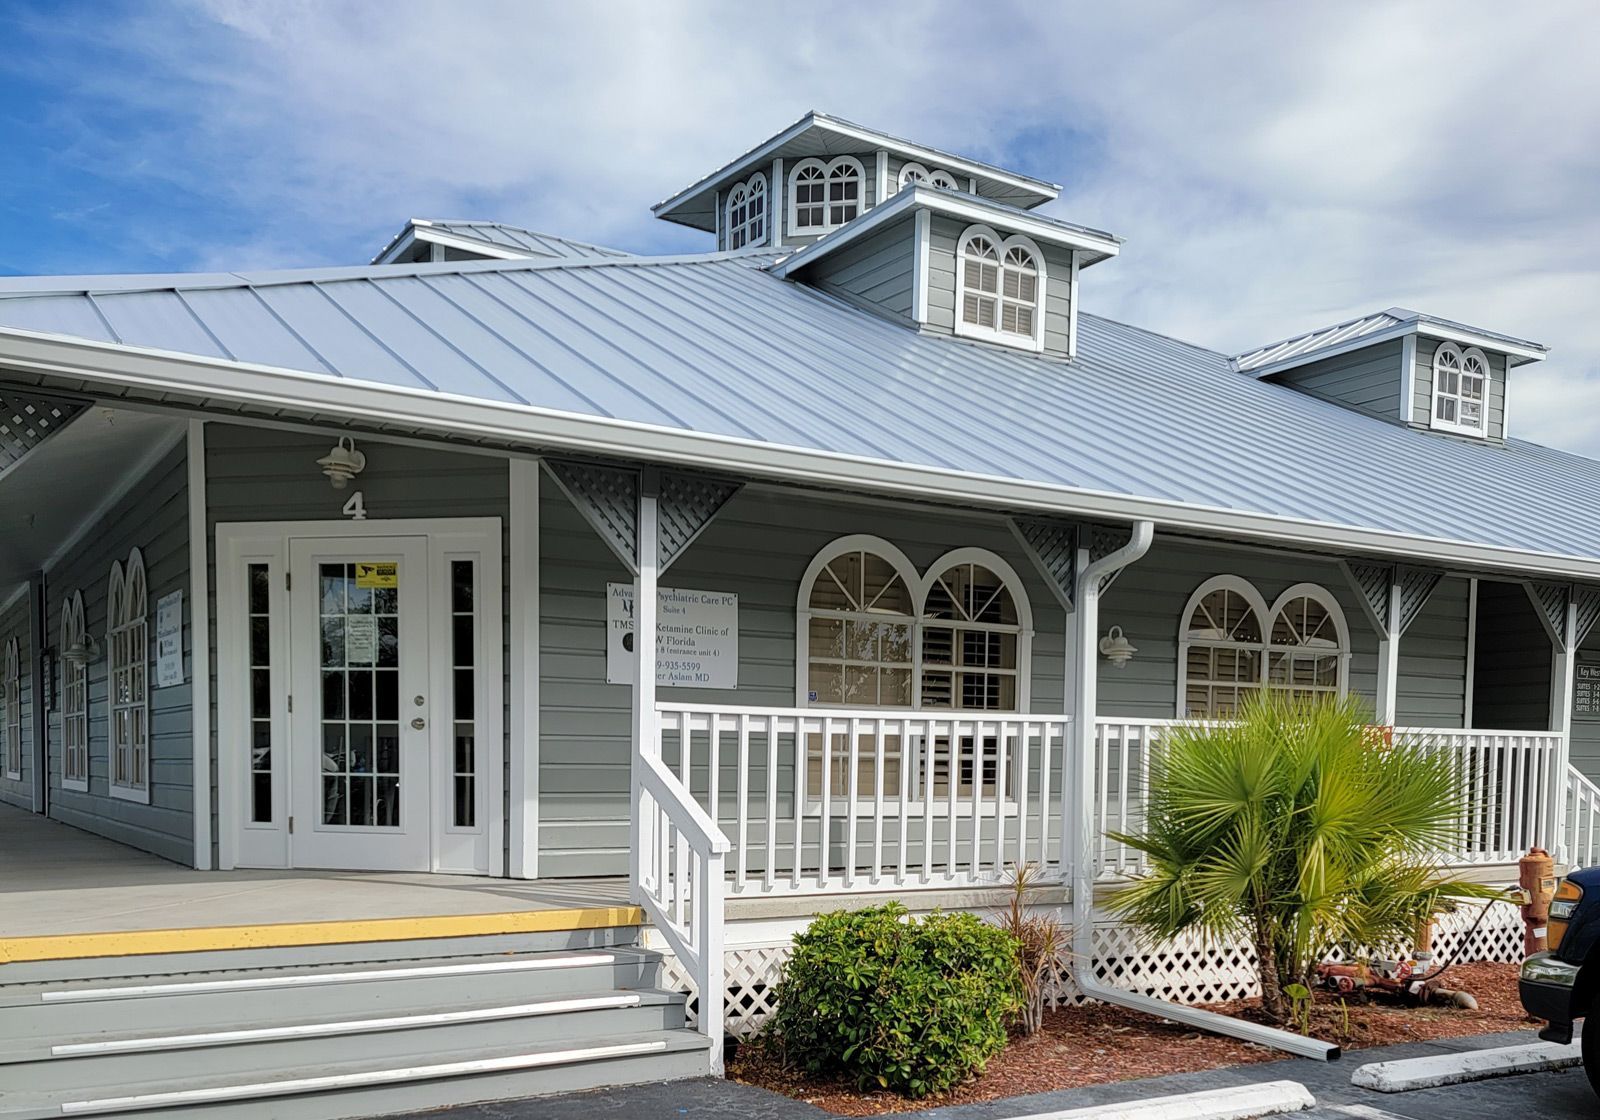 A gray building with a silver roof and a white porch